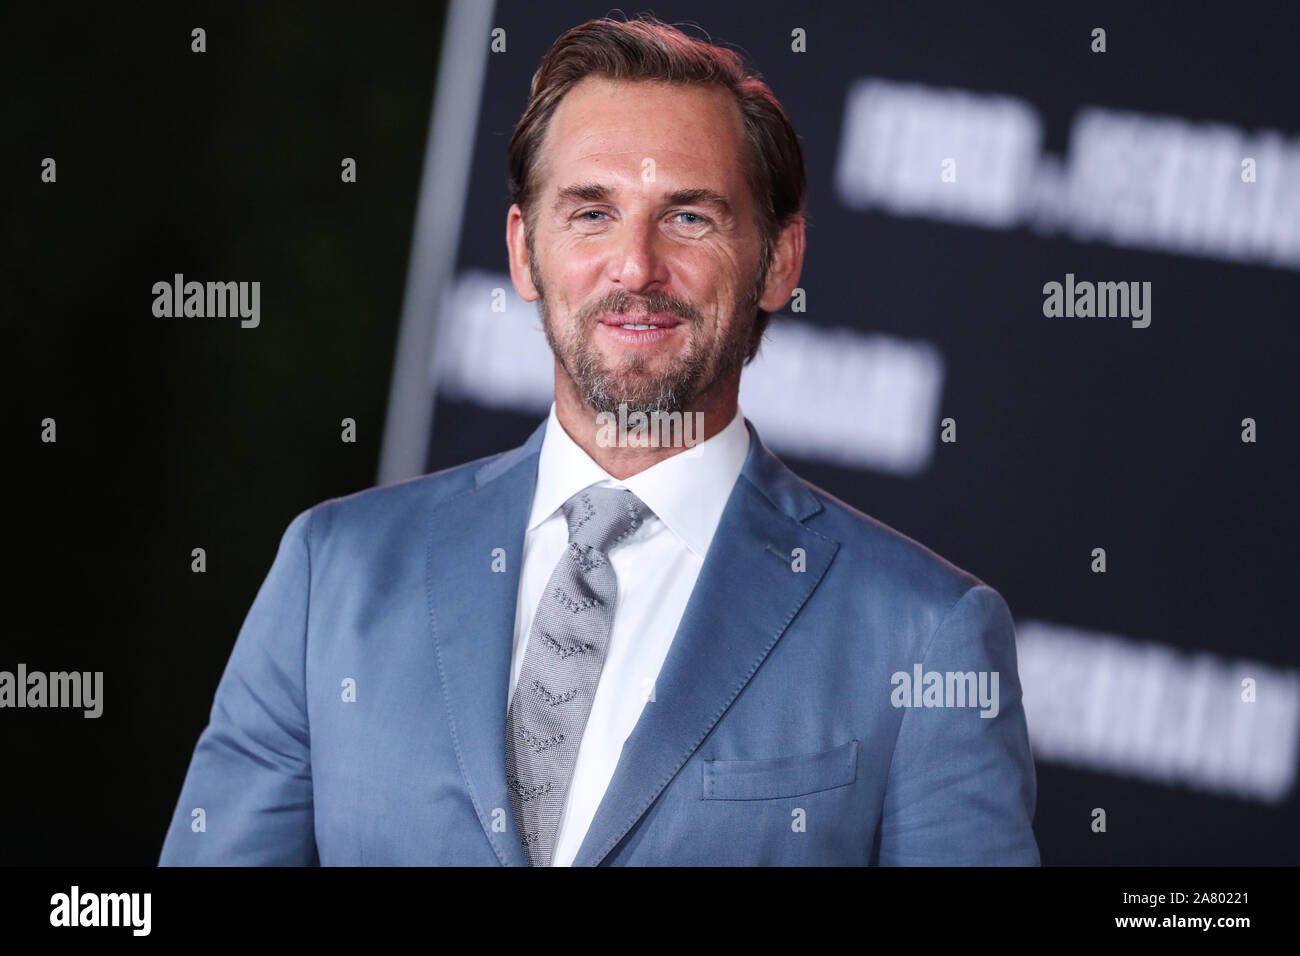 Hollywood, United States. 04th Nov, 2019. HOLLYWOOD, LOS ANGELES, CALIFORNIA, USA - NOVEMBER 04: Actor Josh Lucas arrives at the Los Angeles Premiere Of 20th Century Fox's 'Ford v Ferrari' held at the TCL Chinese Theatre IMAX on November 4, 2019 in Hollywood, Los Angeles, California, United States. (Photo by Xavier Collin/Image Press Agency) Credit: Image Press Agency/Alamy Live News Stock Photo